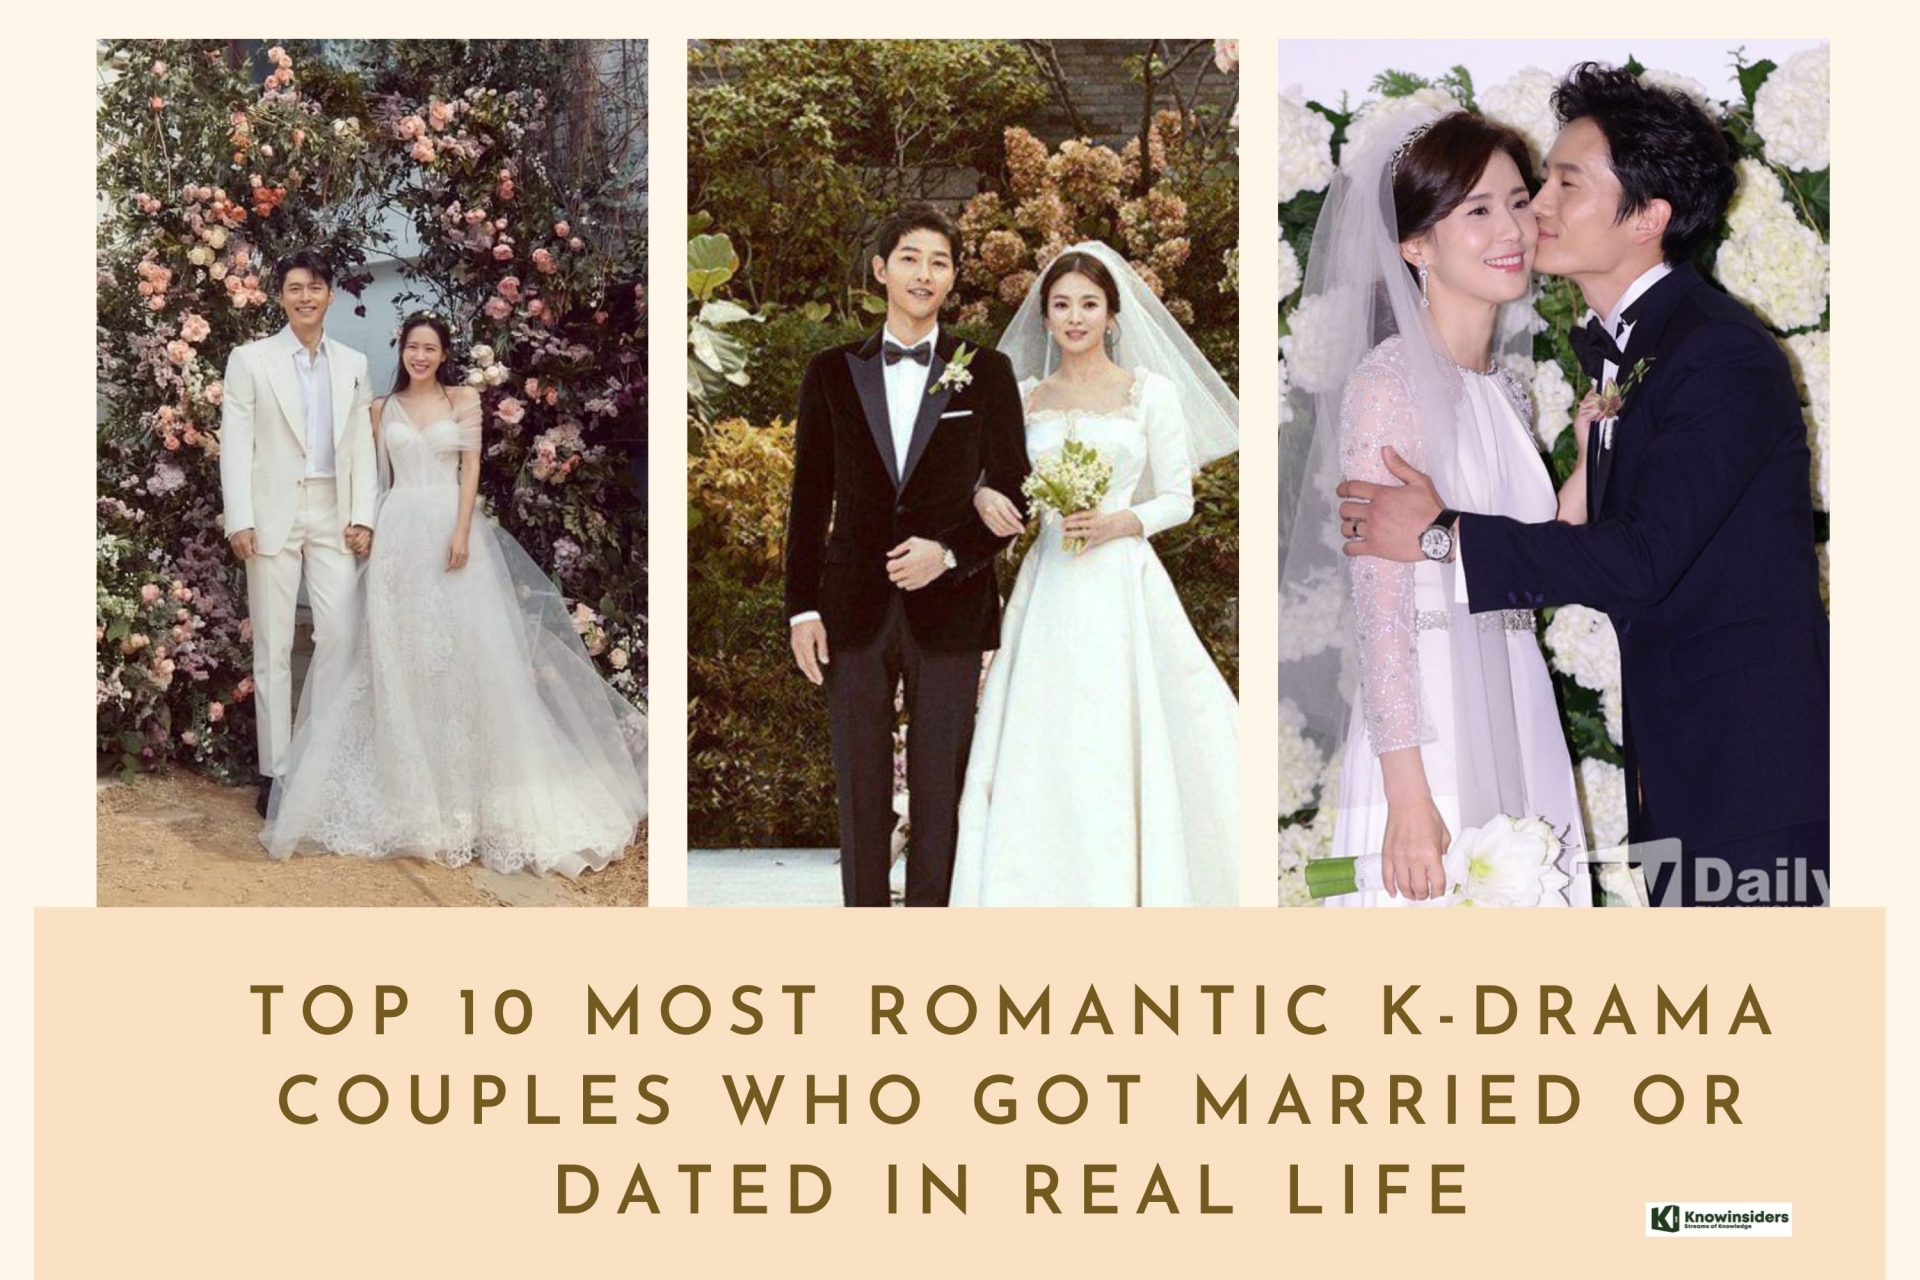 Top 10 Most Romantic K-Drama Couples Who Got Married or Dated in Real Life